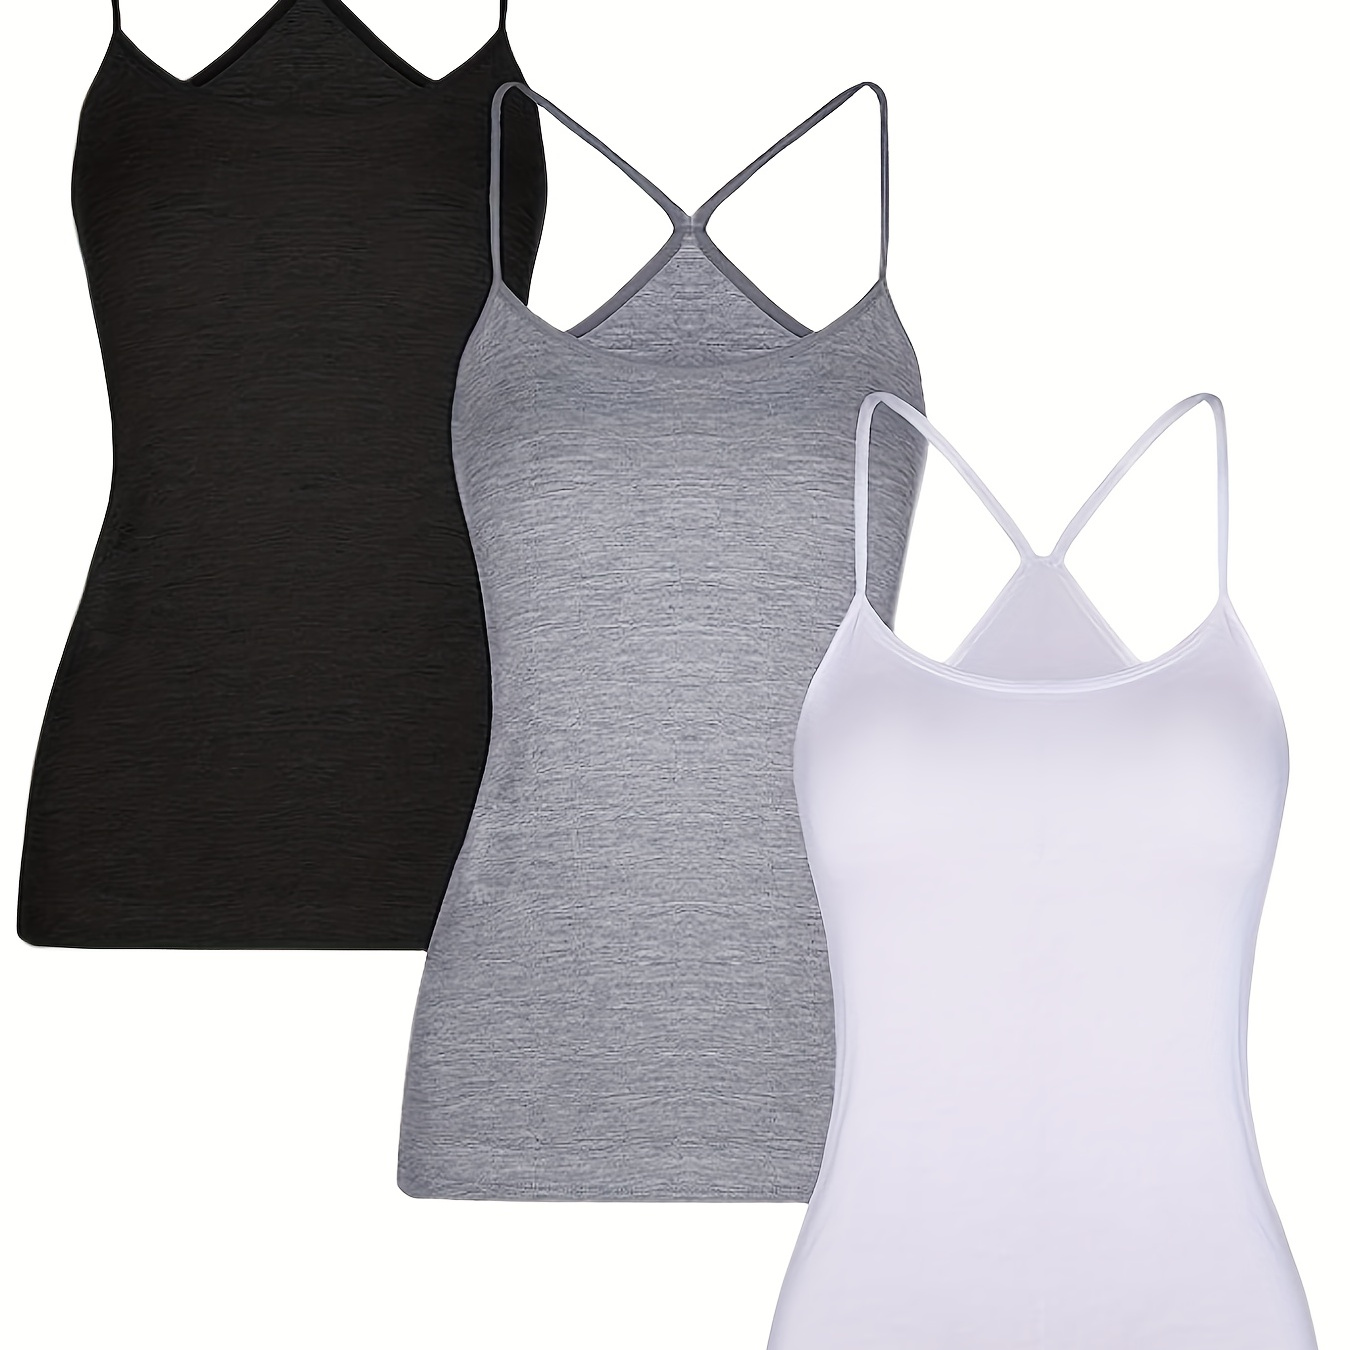 

3 Packs Mixed Color Cami Tops, Casual Crew Neck Summer Sleeveless Top, Women's Clothing